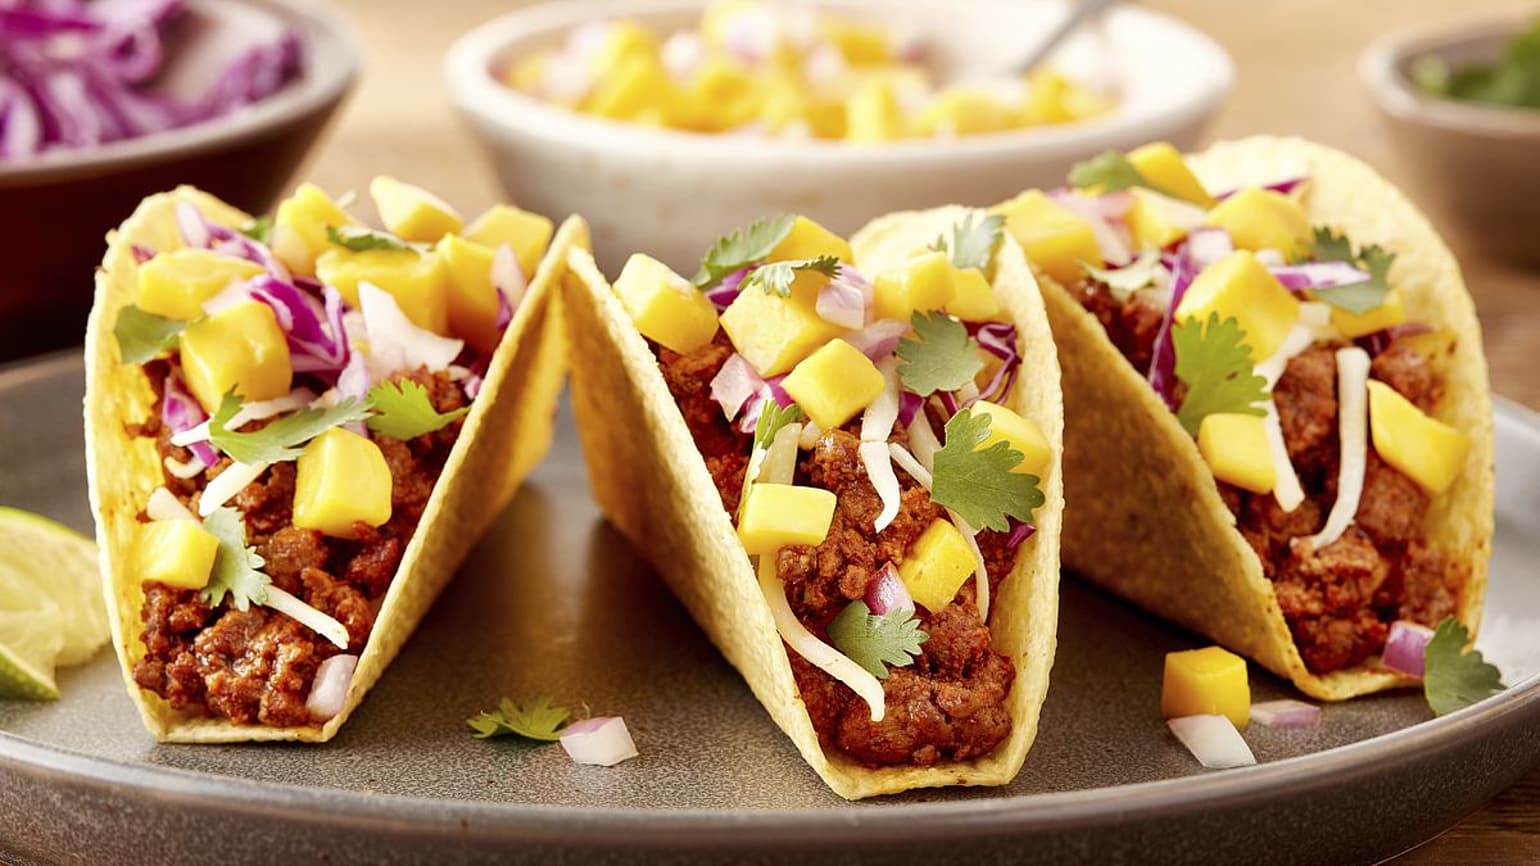 Aussie-style beef and salad tacos recipe